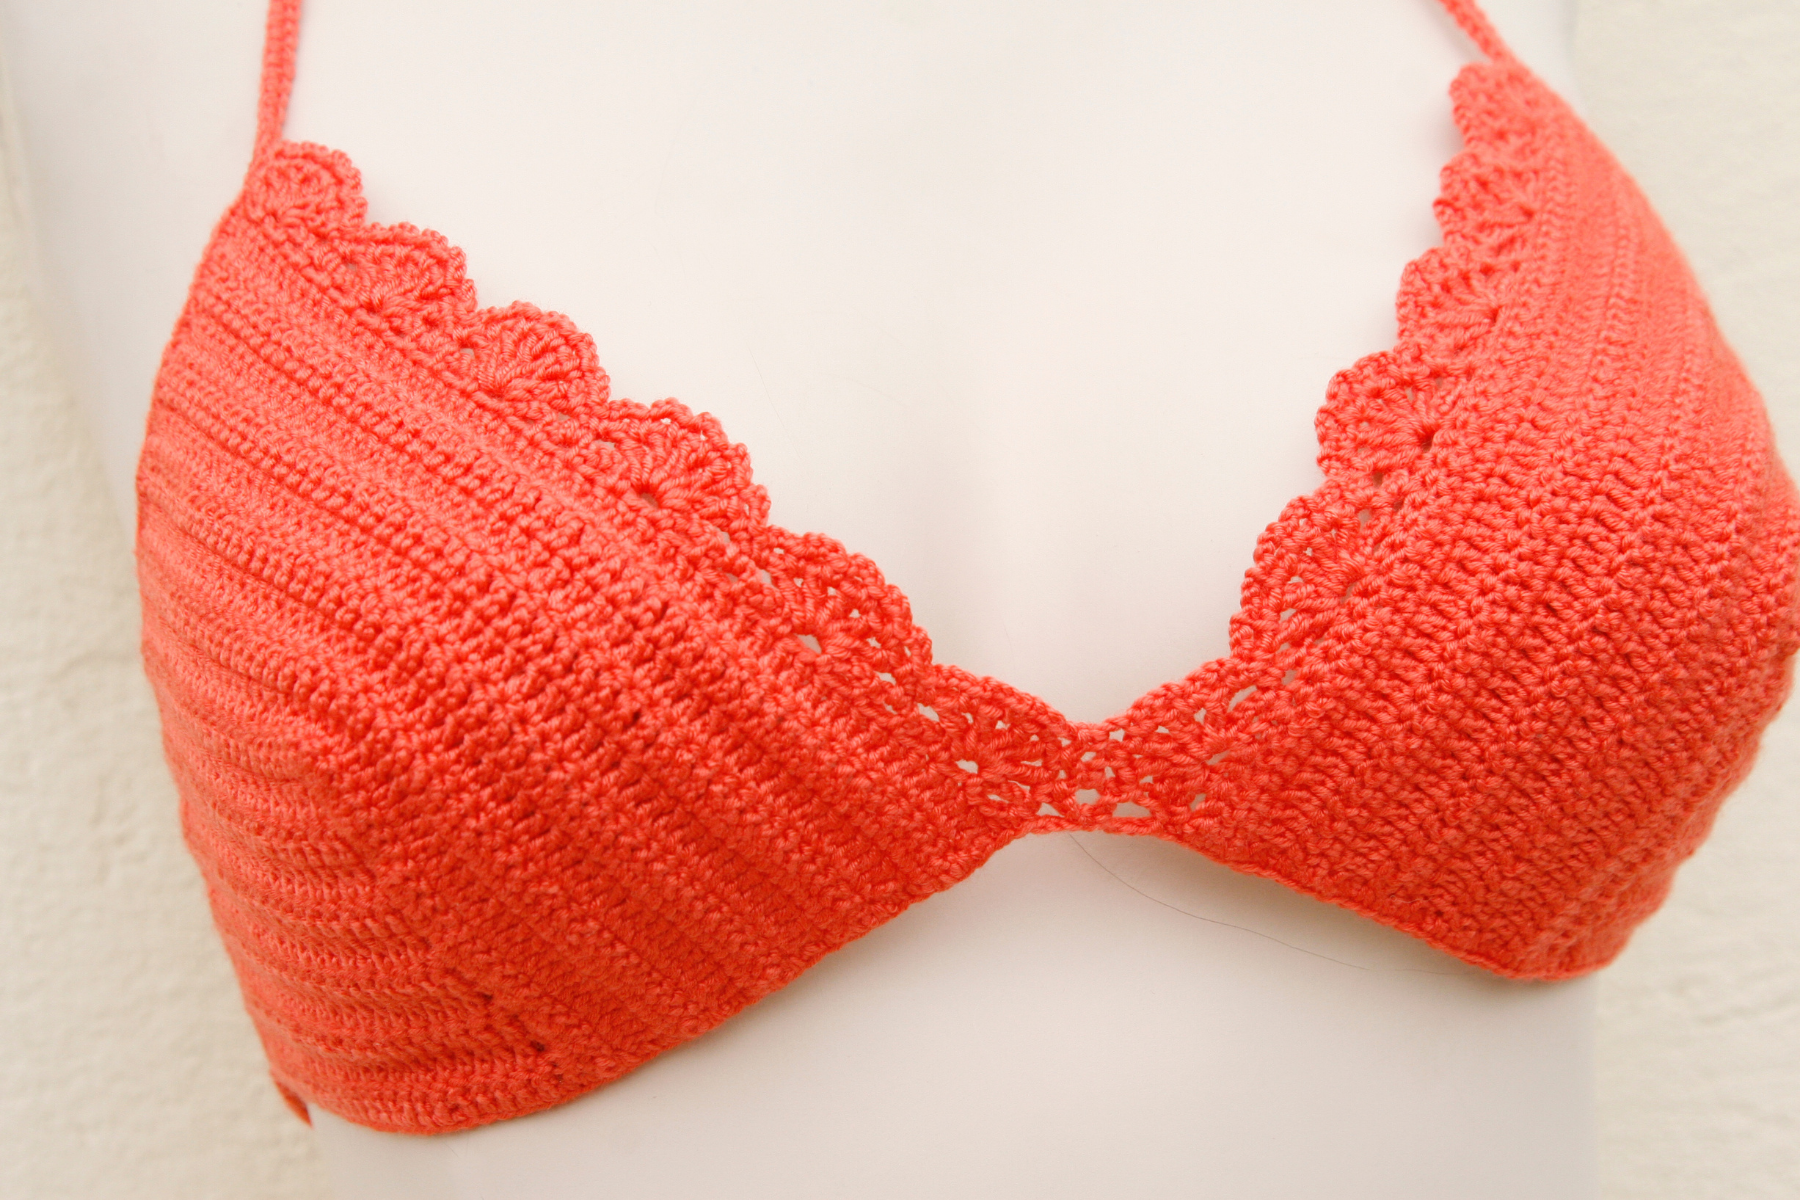 I Made a bra cup crochet written patten with measurements and helpful , Crochet